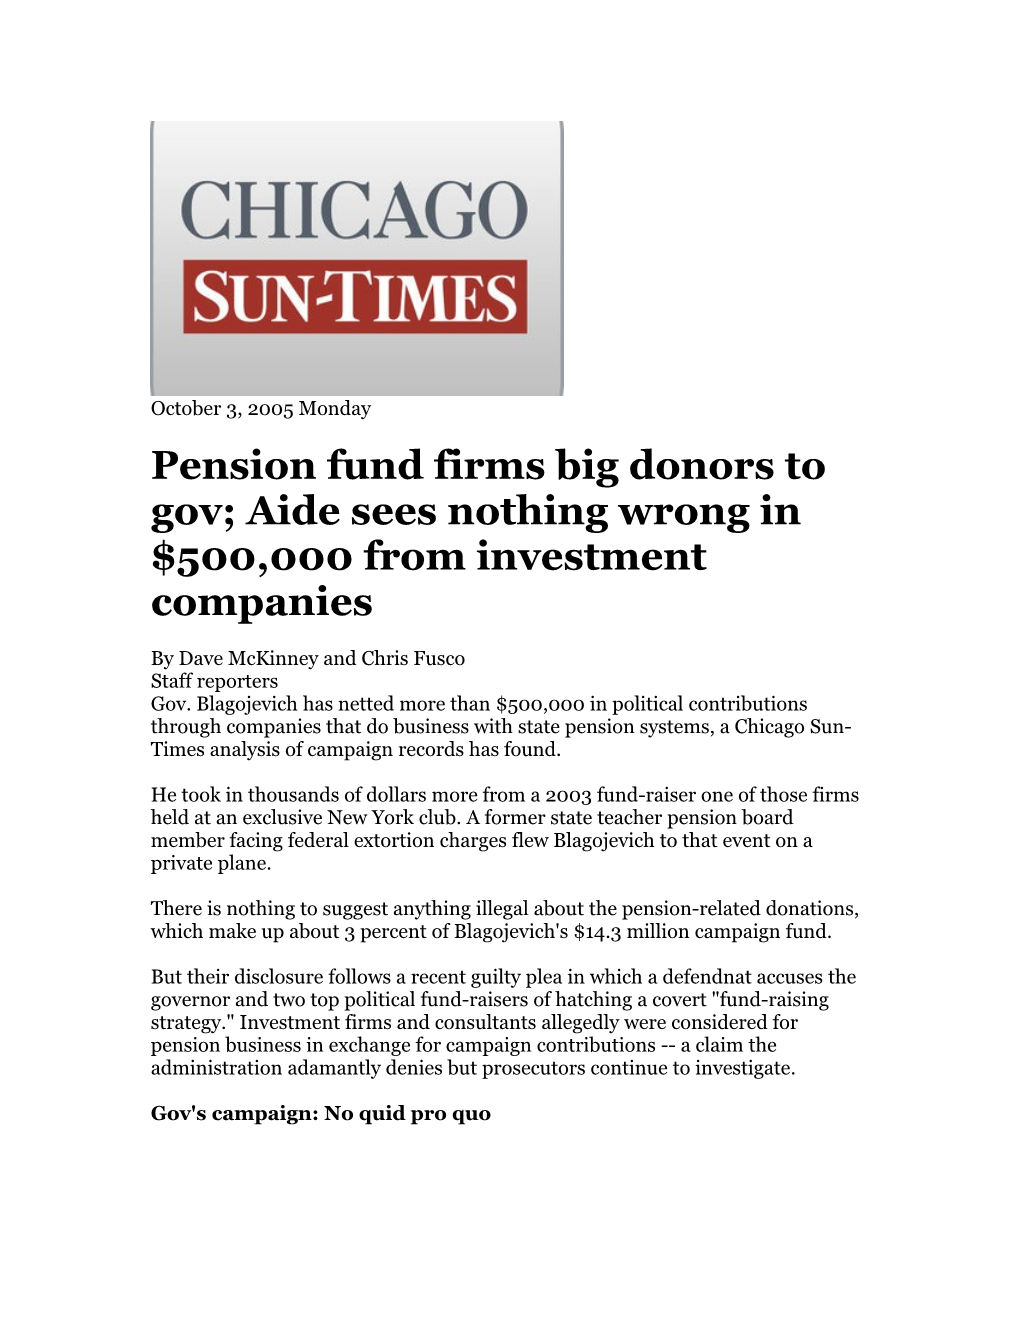 Pension Fund Firms Big Donors to Gov; Aide Sees Nothing Wrong in $500,000 from Investment